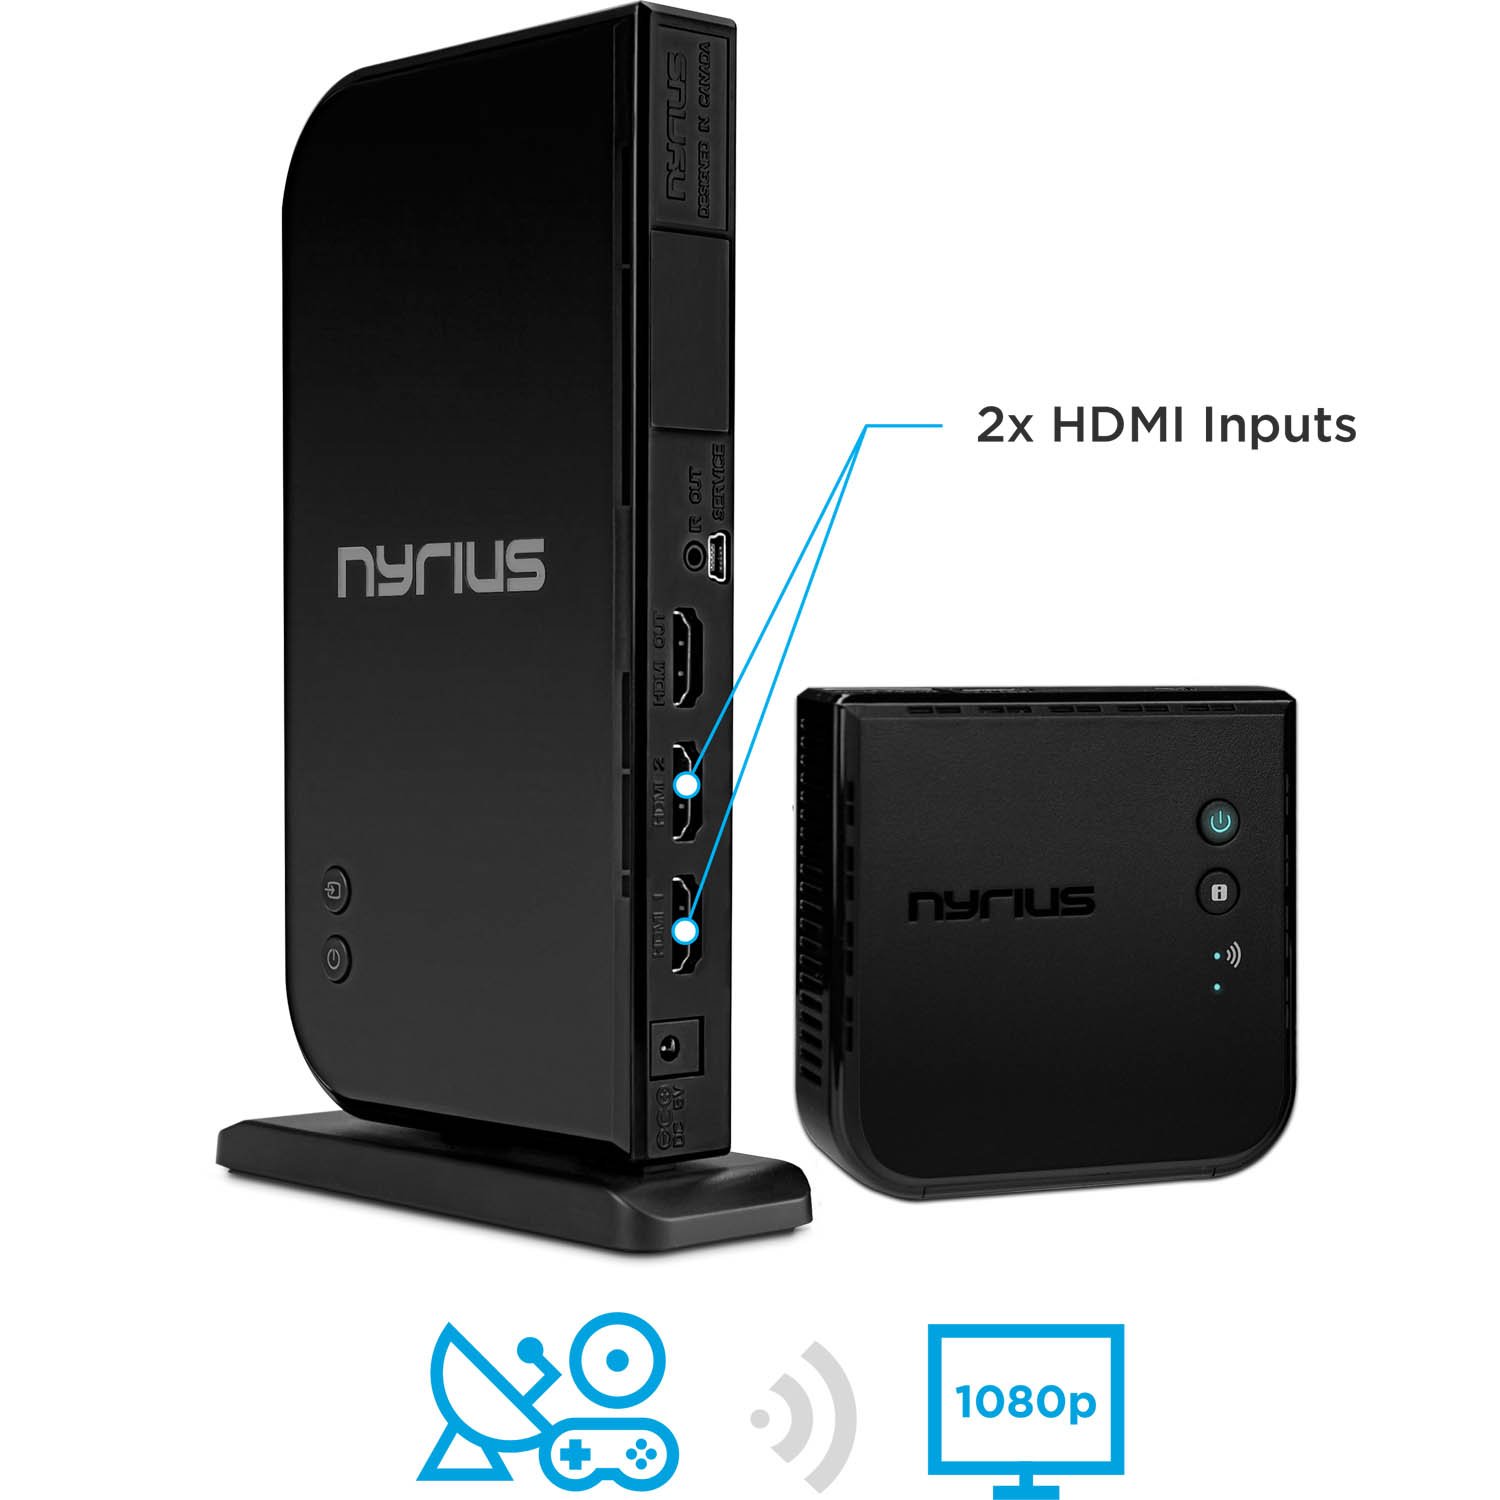 Nyrius Aries Home+ Wireless HDMI 2X Input Transmitter & Receiver for Streaming HD 1080p 3D Video and Digital Audio from Cable Box, Satellite, Bluray, DVD, PS4, PS3, Laptops, PC - 2 Pack